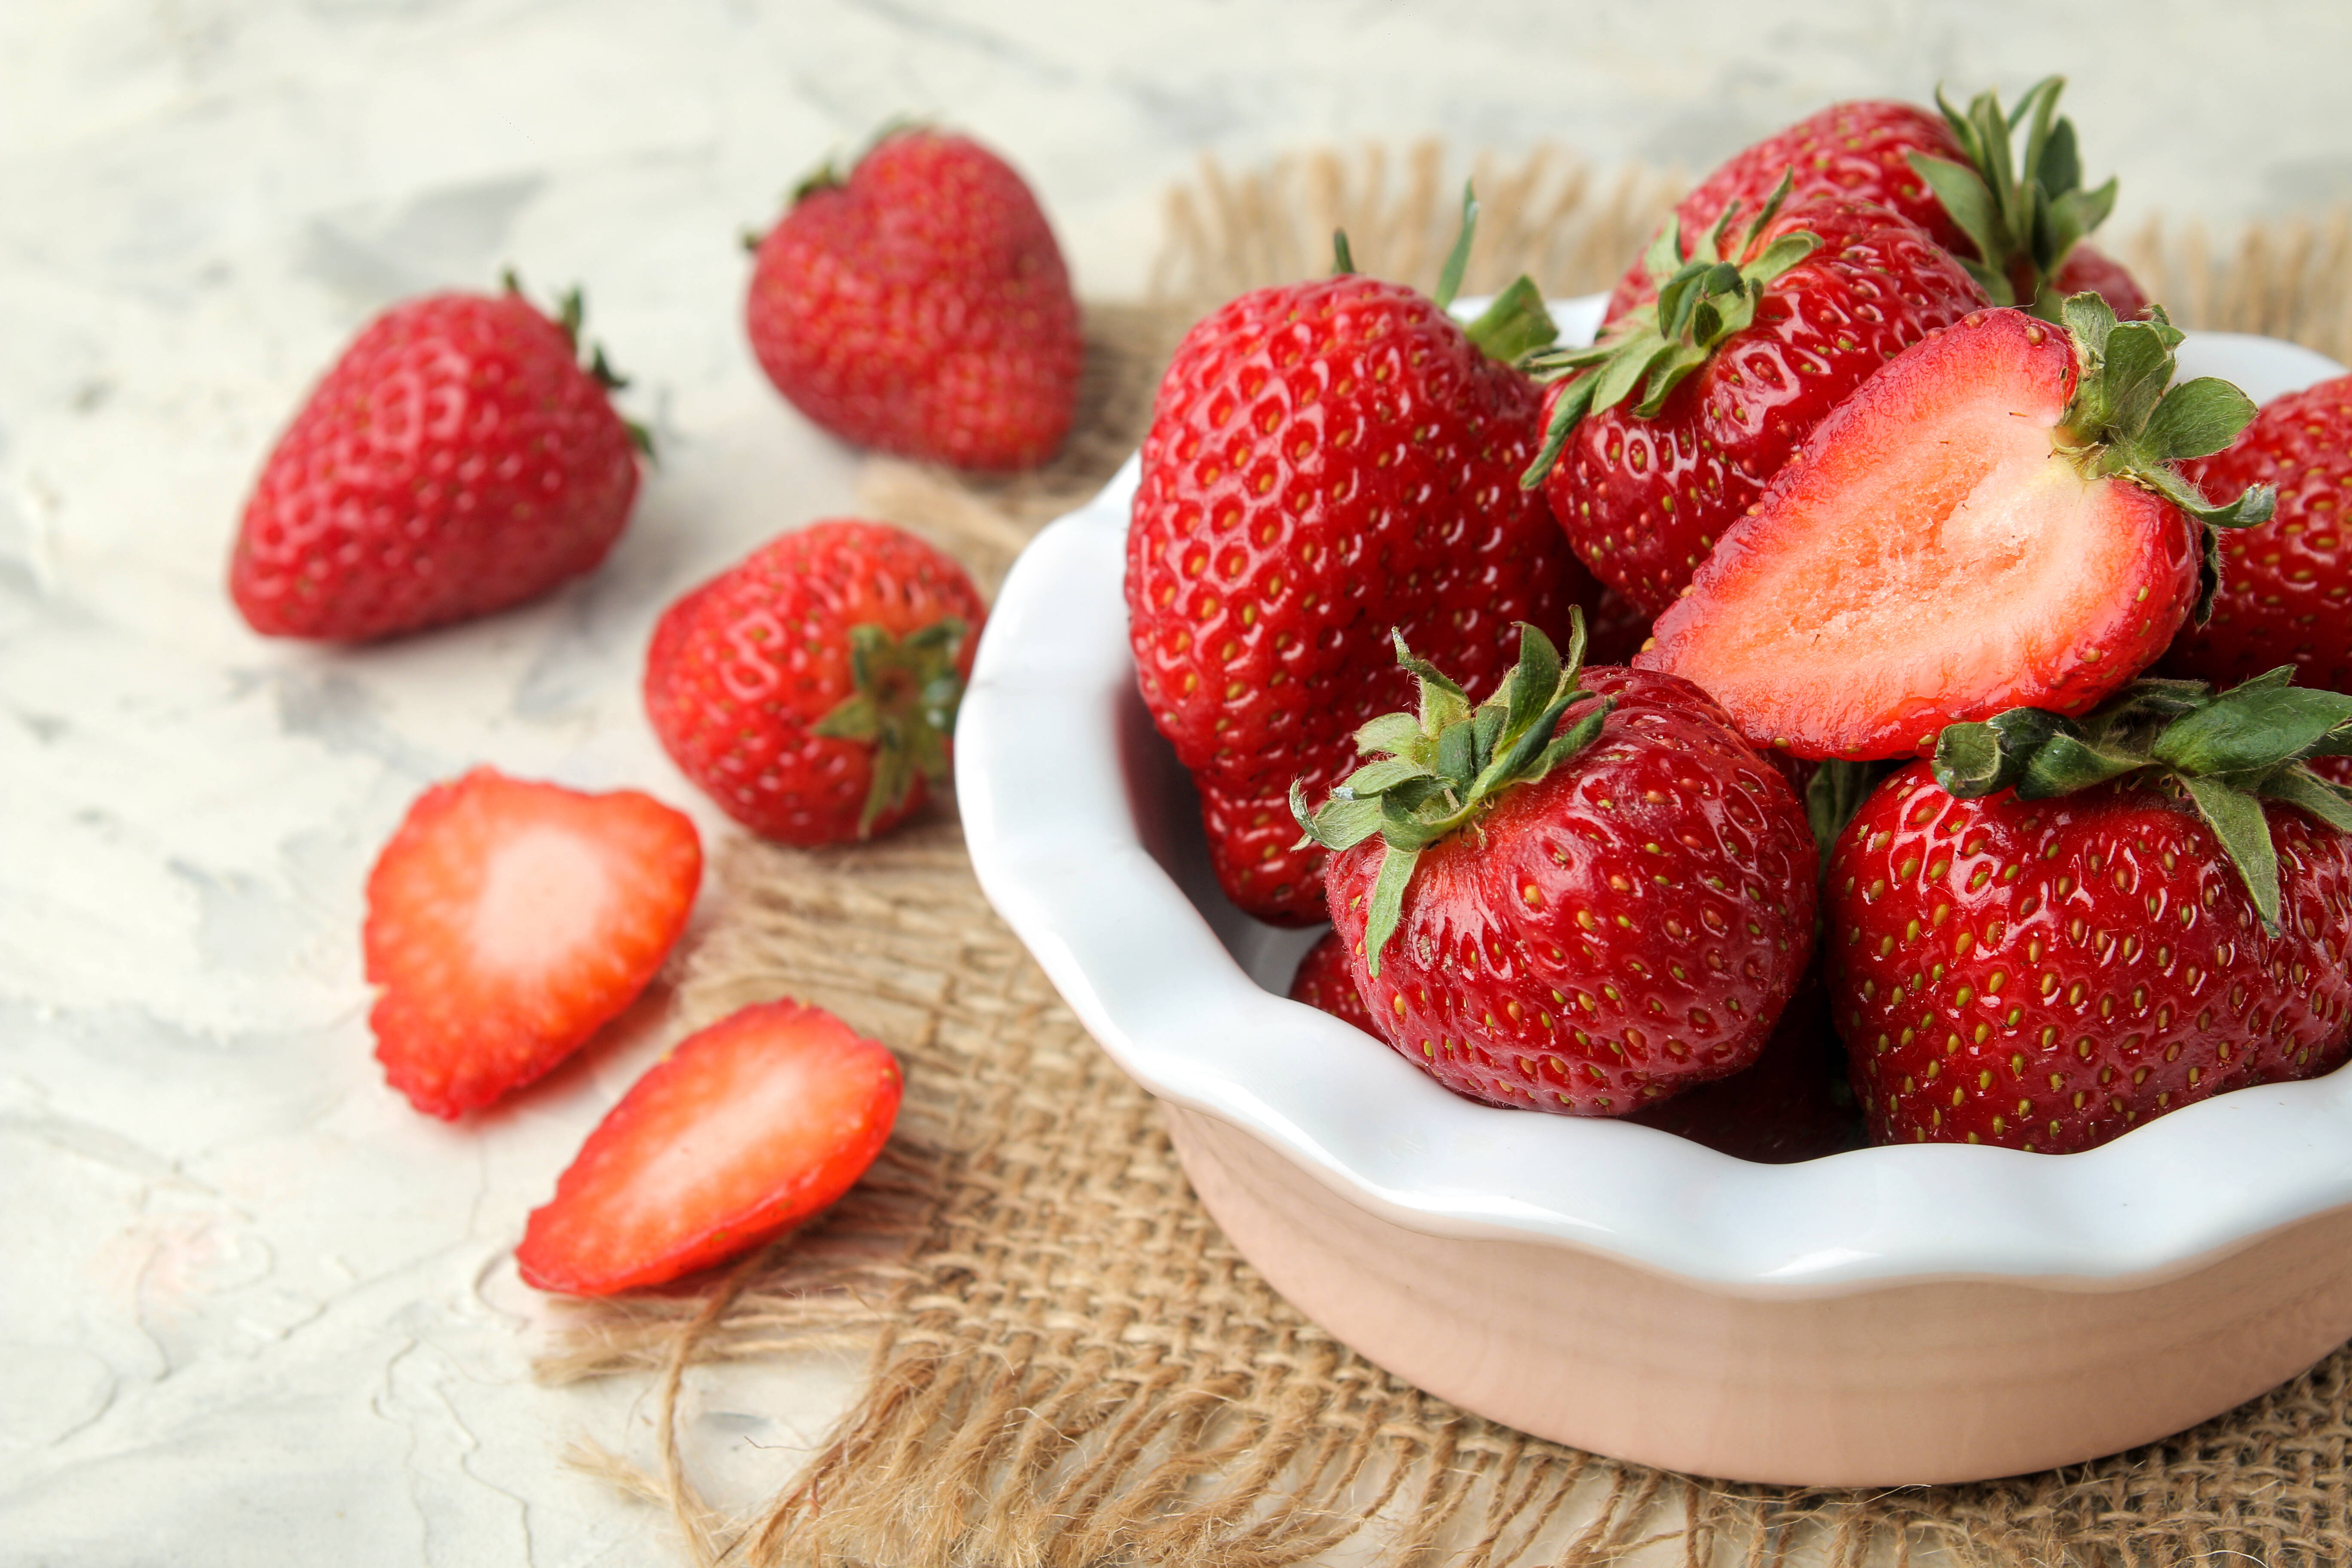 🍴 Tabe Choku｜Do you know “Amarin”, a rare strawberry with extremely sweet taste? "Amarin" is an original strawberry variety from Saitama Prefecture. As the name suggests, it is sweet...